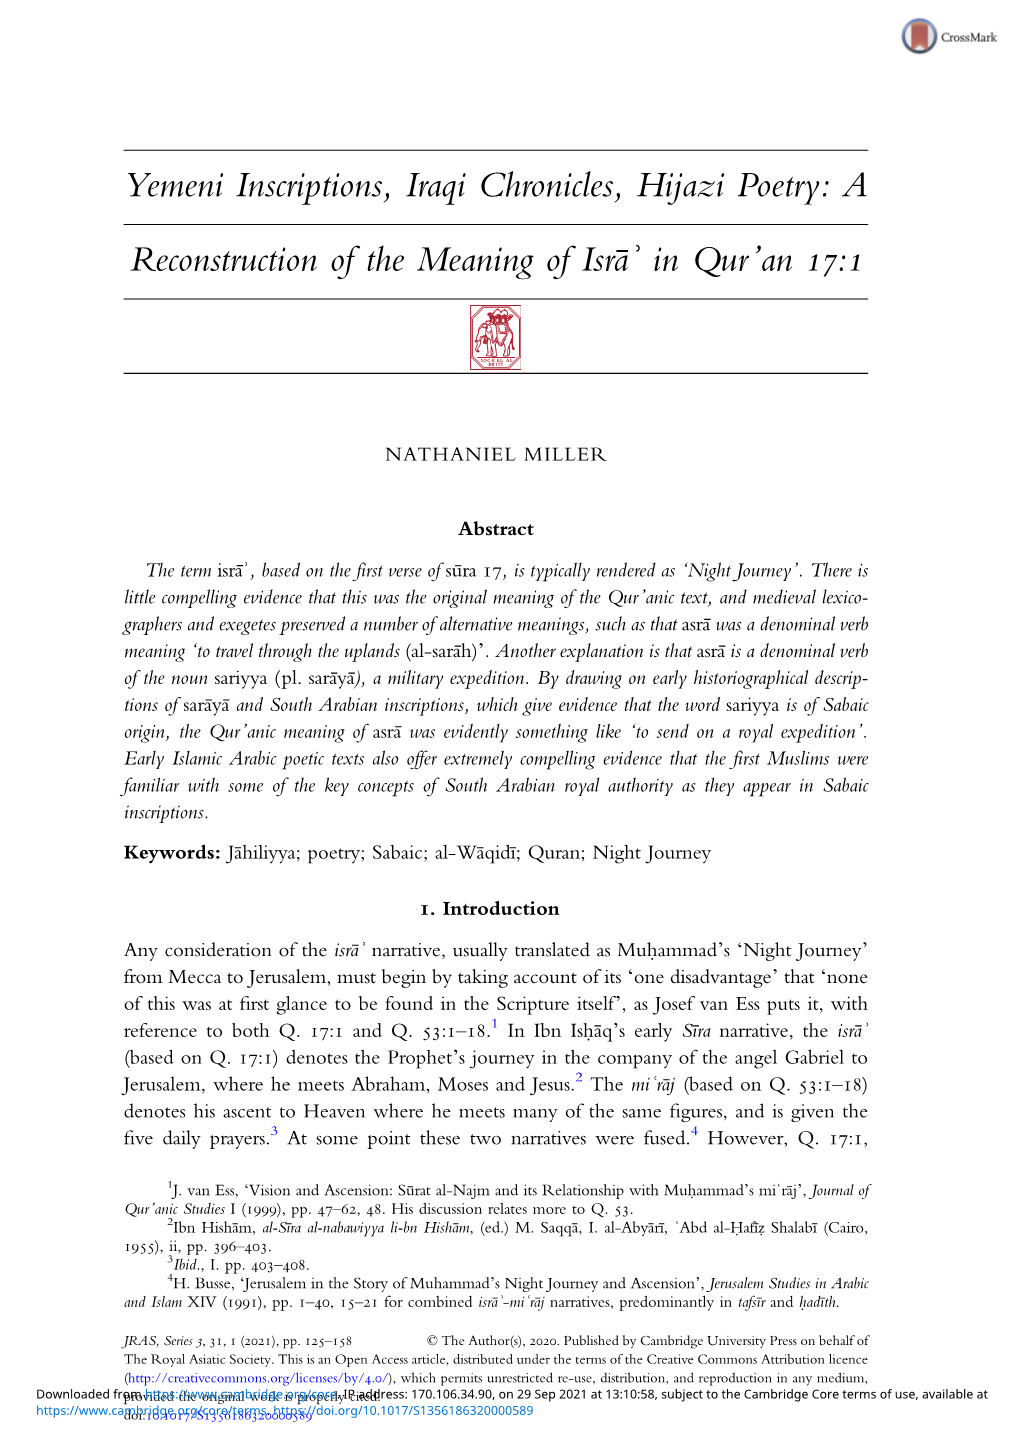 Yemeni Inscriptions, Iraqi Chronicles, Hijazi Poetry: a Reconstruction of the Meaning of Isrāʾ in Qur'an